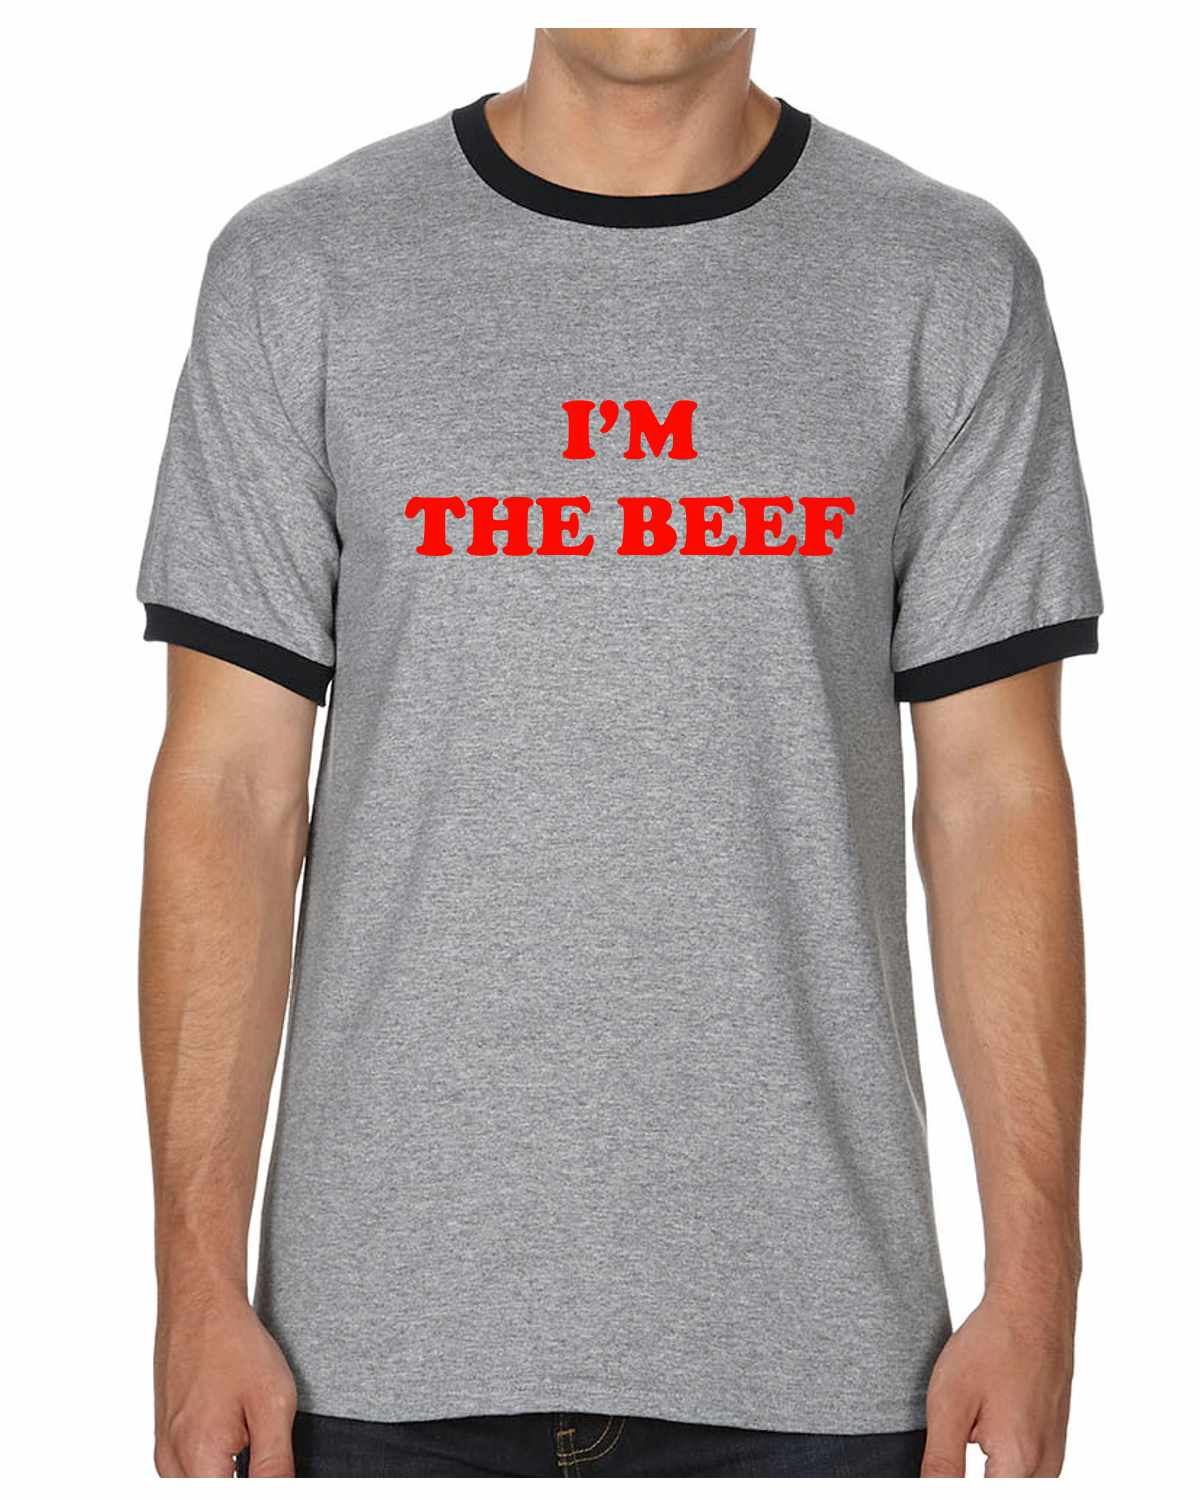 I'm The Beef Ringer Tee (#1060-8)